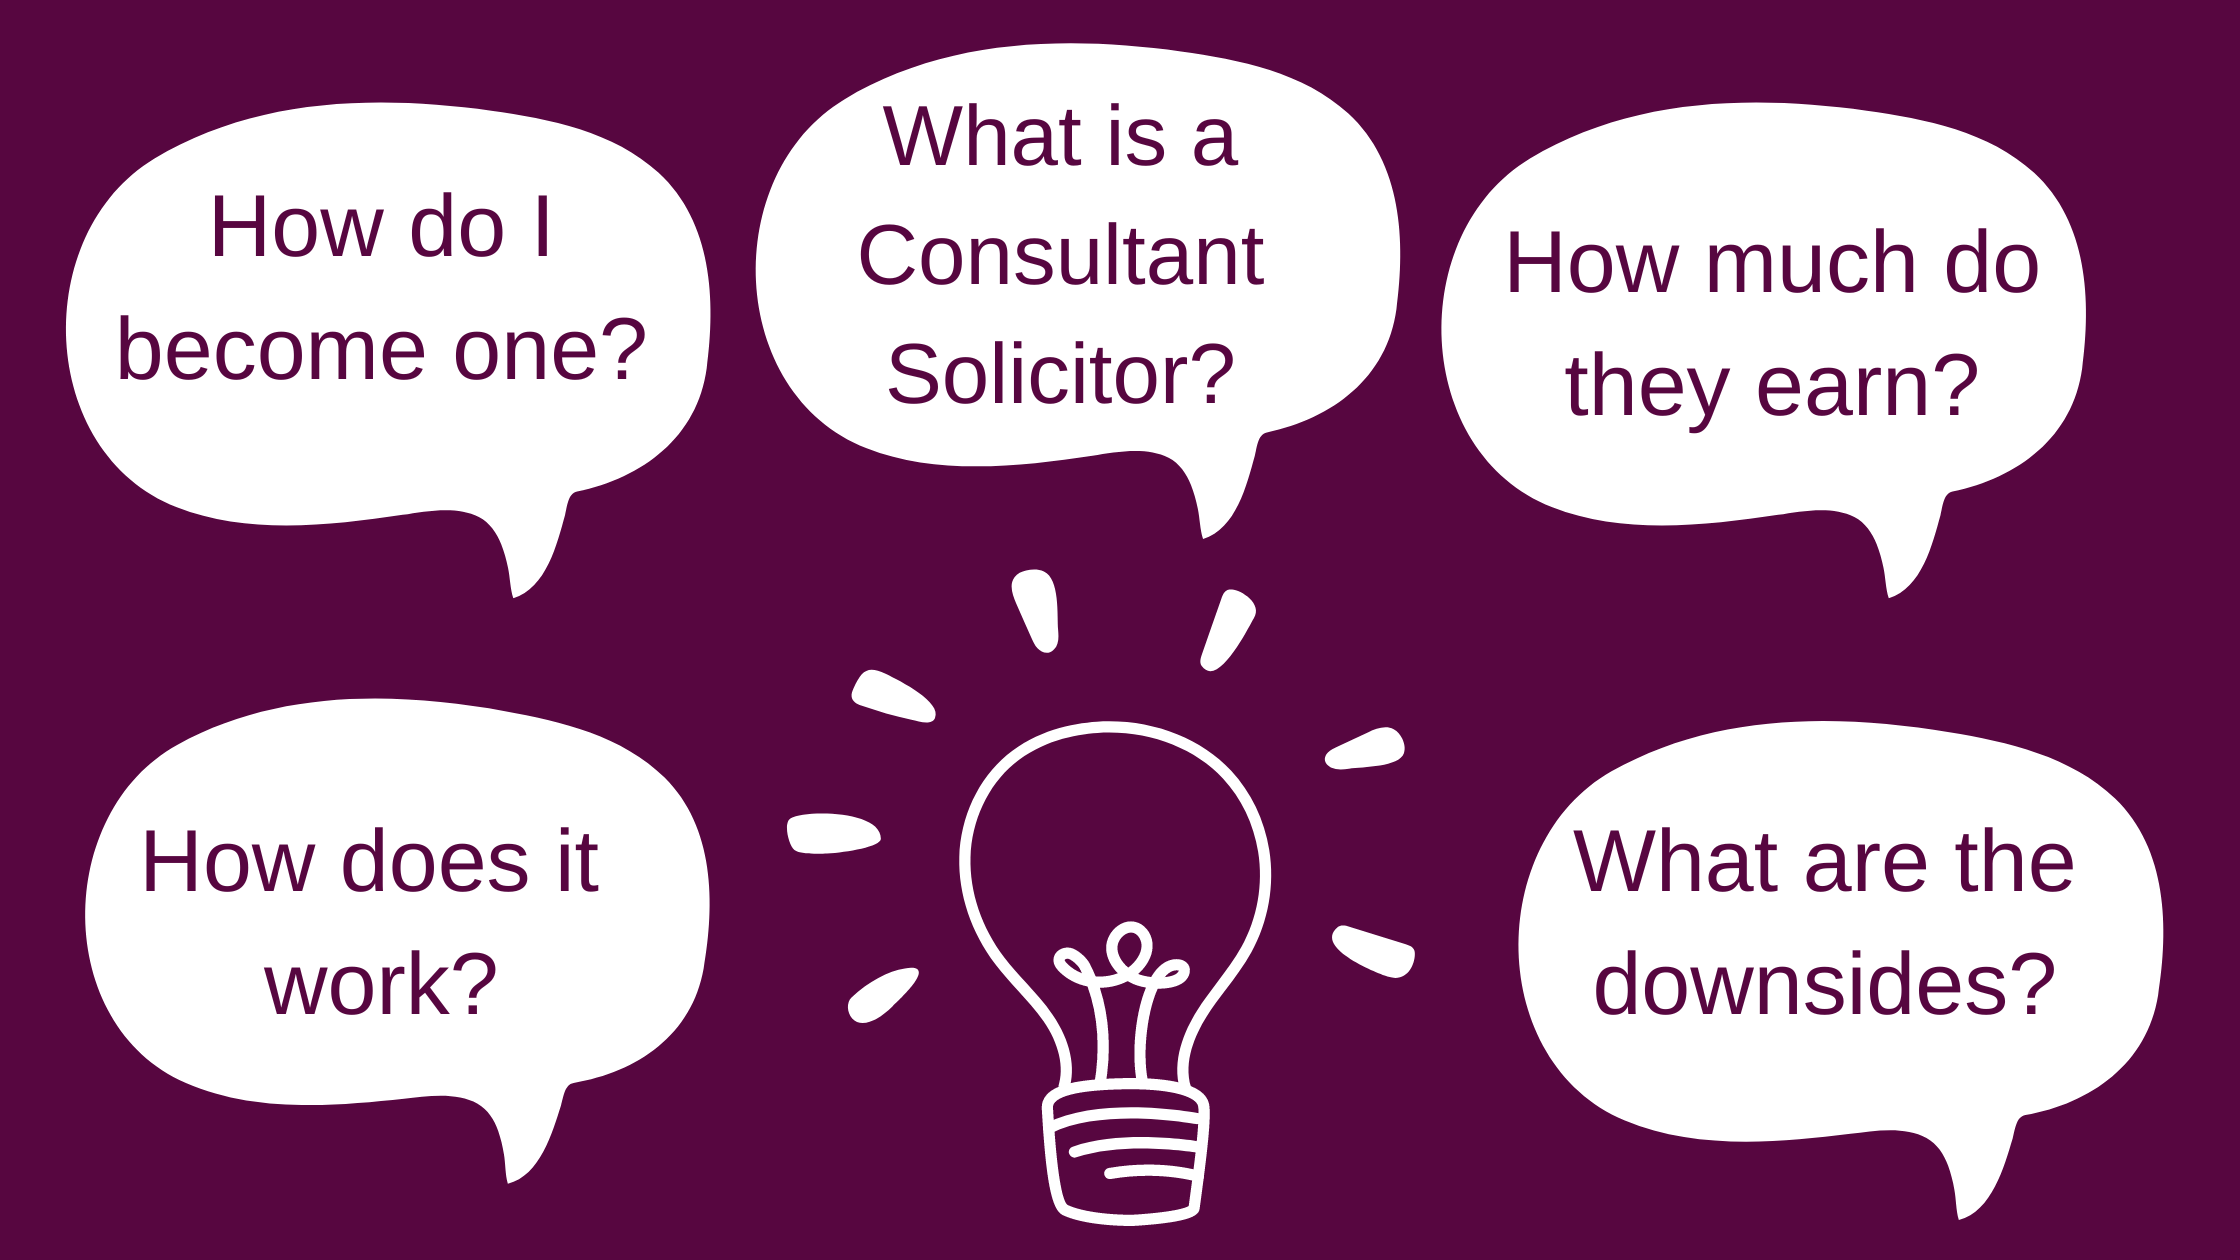 Becoming a consultant solicitor